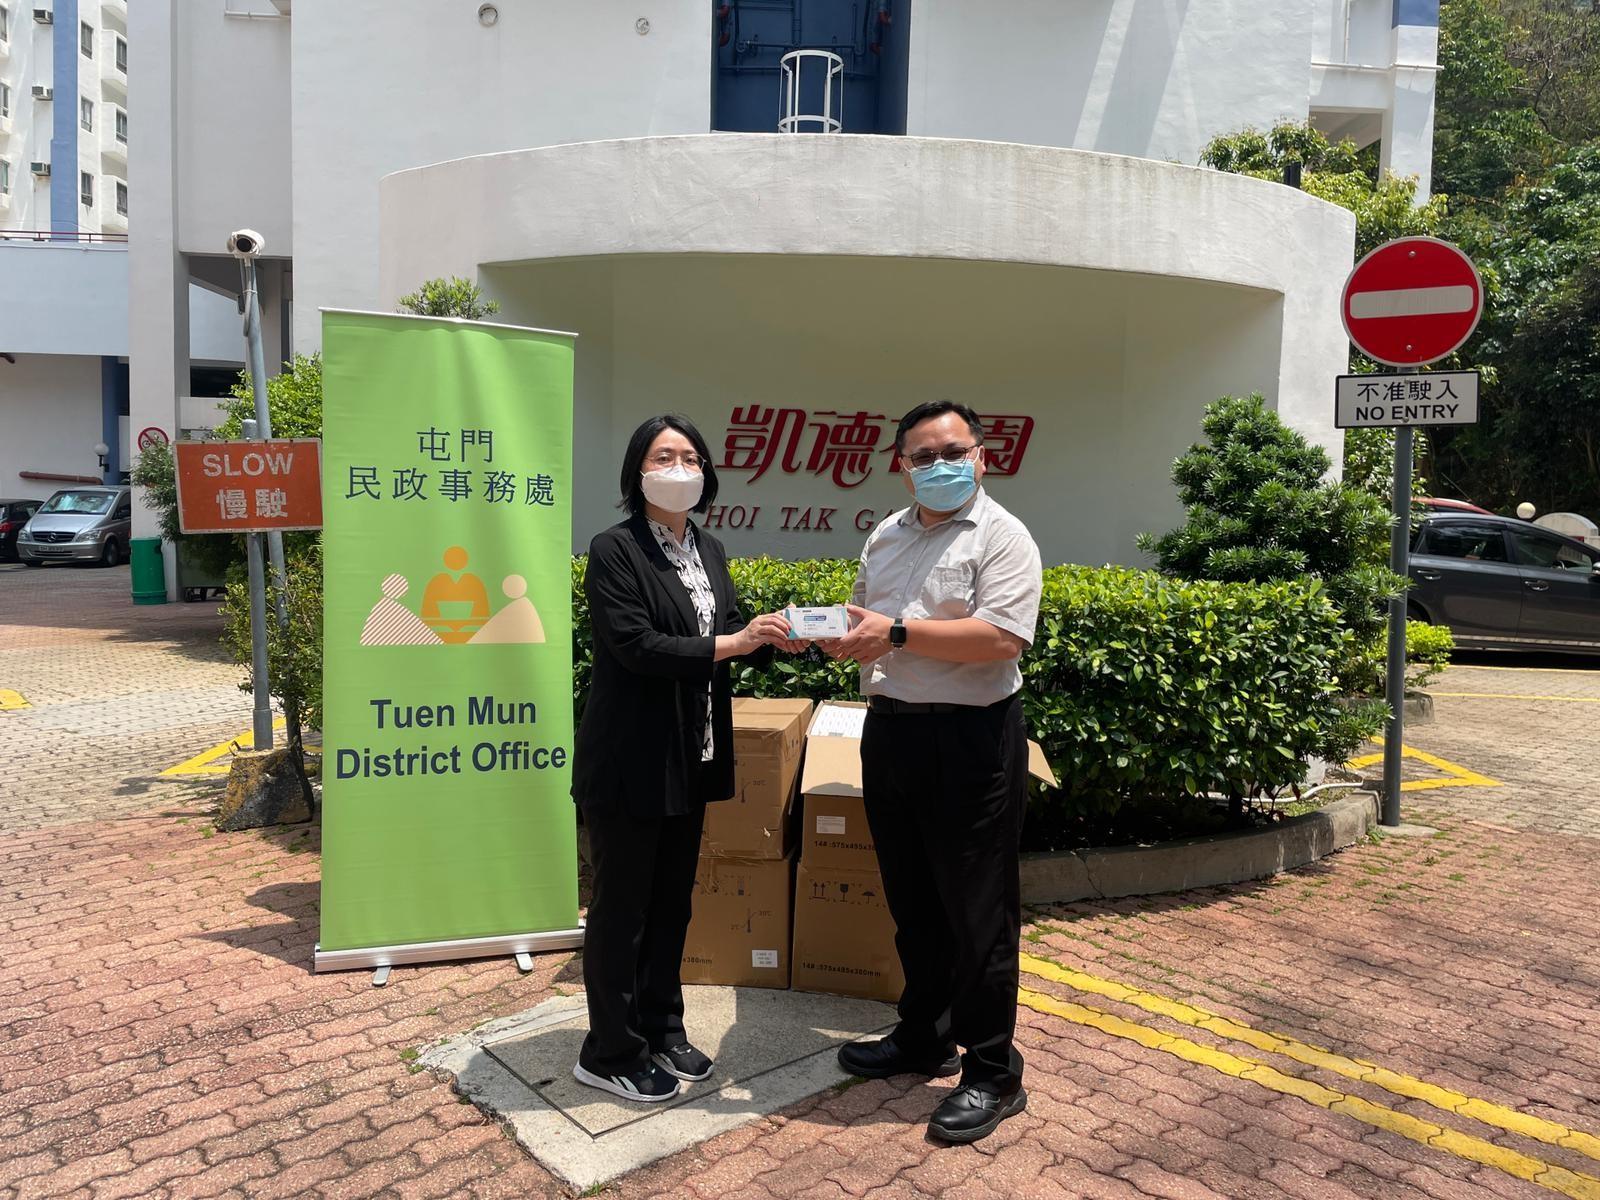 The Tuen Mun District Office today (April 29) distributed COVID-19 rapid test kits to households, cleansing workers and property management staff living and working in Hoi Tak Gardens for voluntary testing through the property management company.